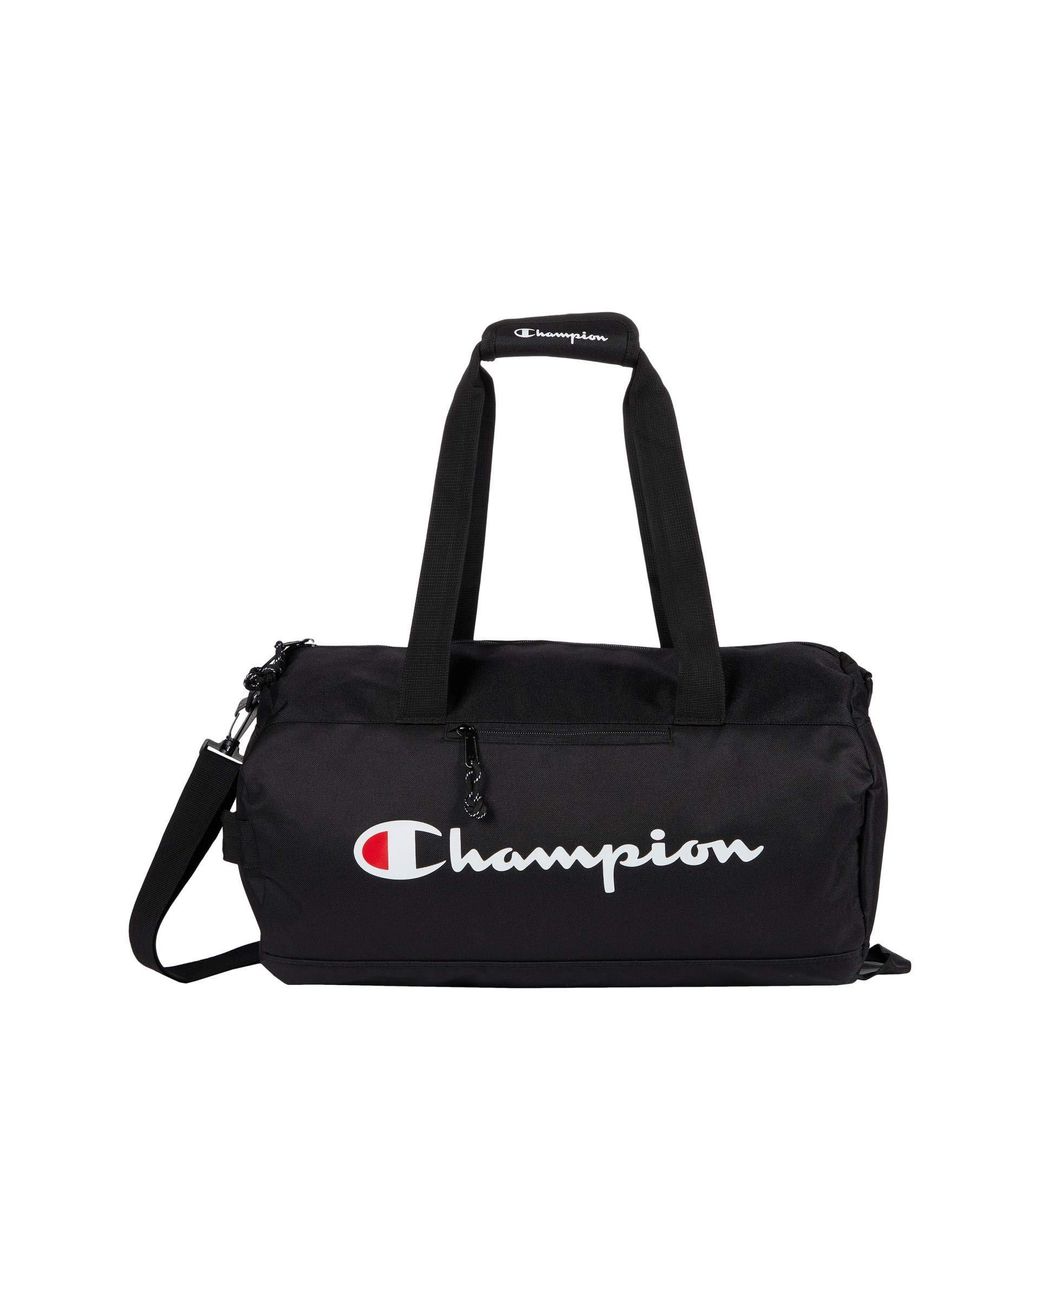 champion duffle bag with wheels